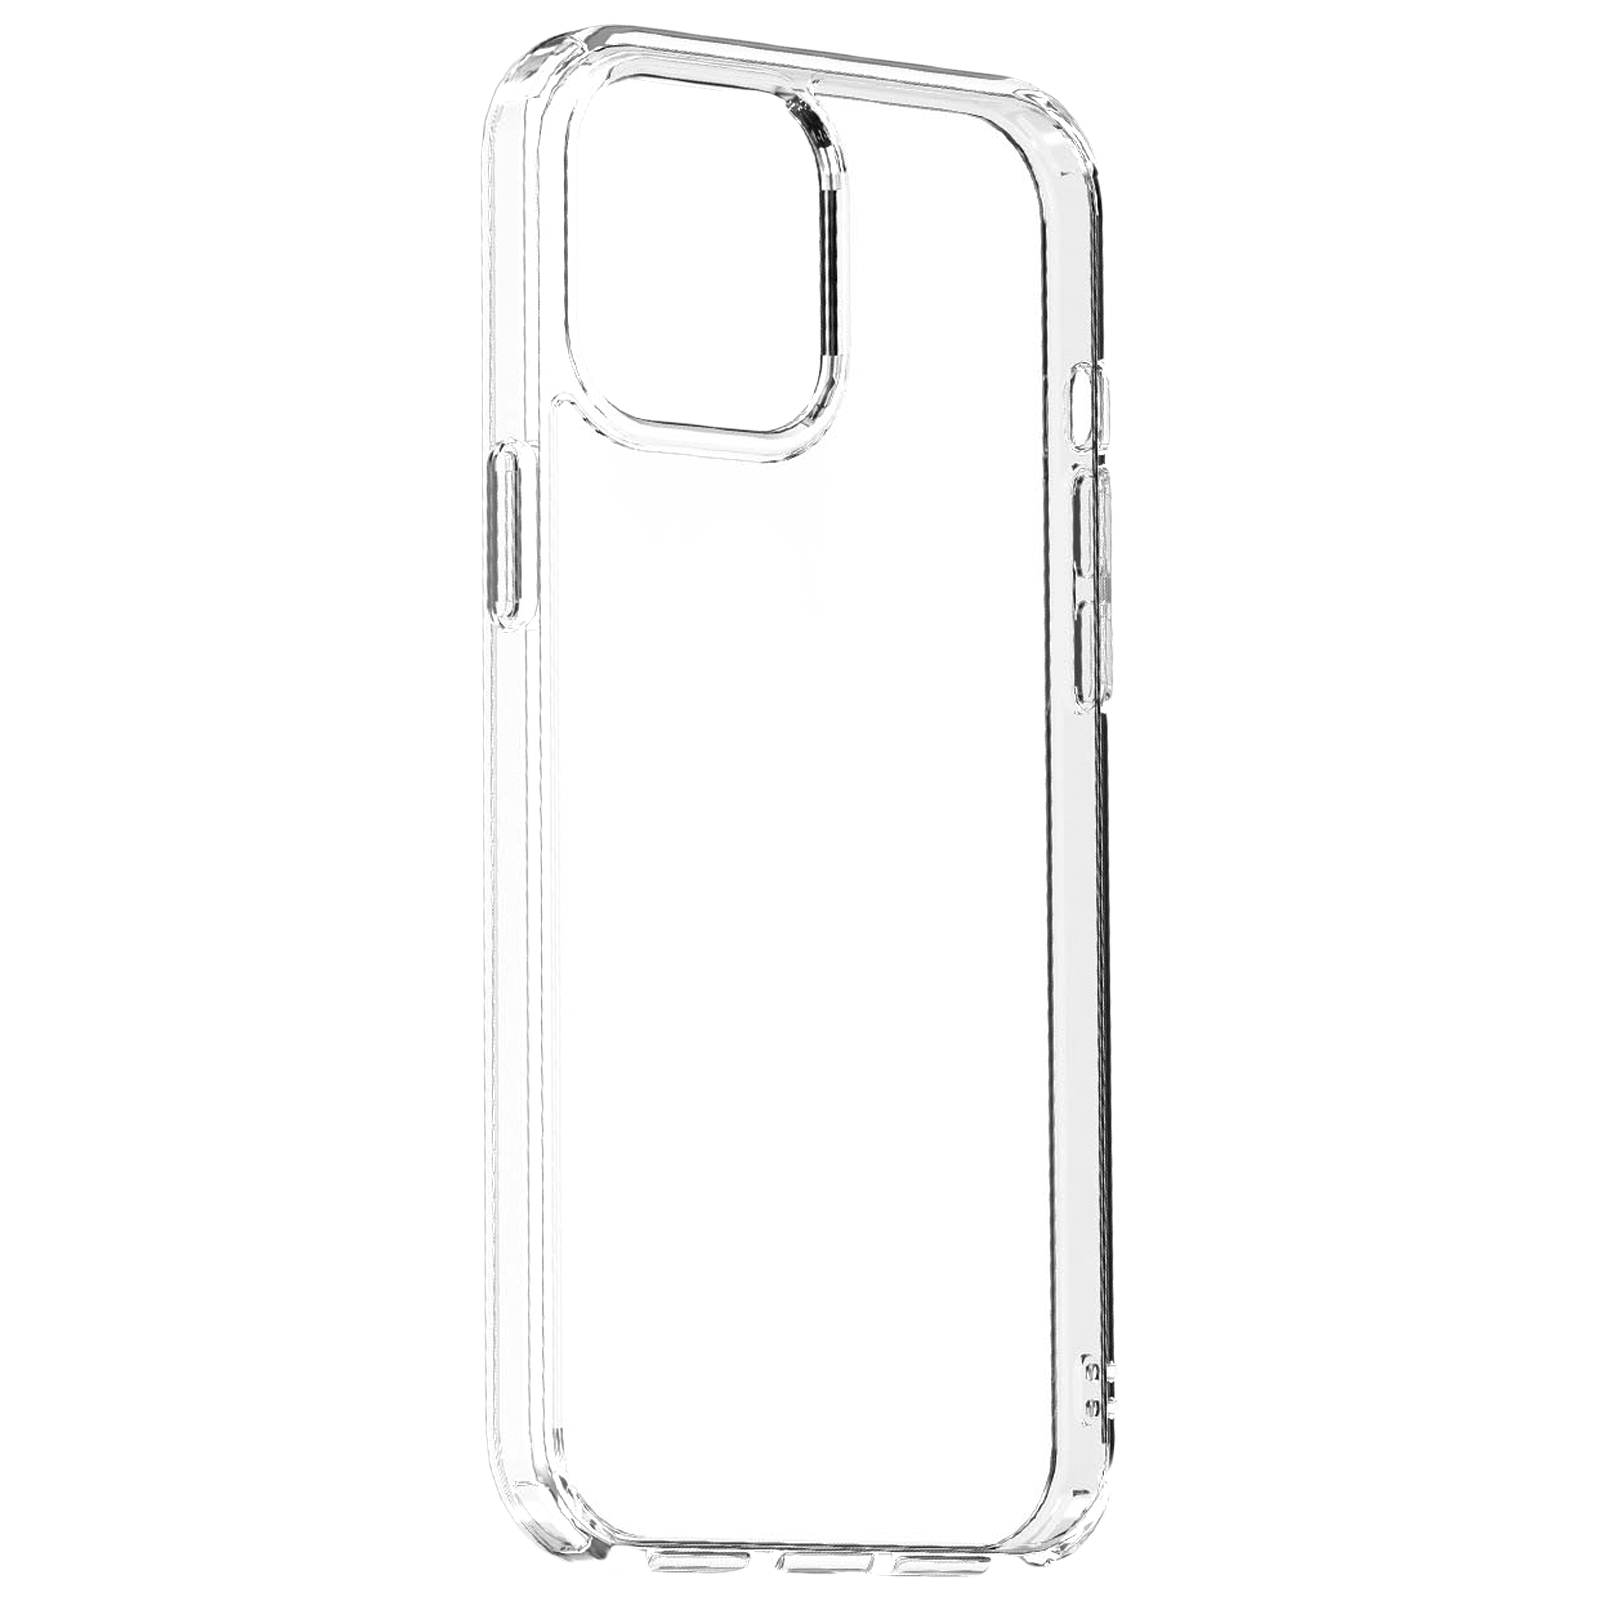 Dr. Vaku Glassy Hard TPU & Polycarbonate Back Cover for Apple iPhone 12 Mini (Scratch Resistant, Clear)